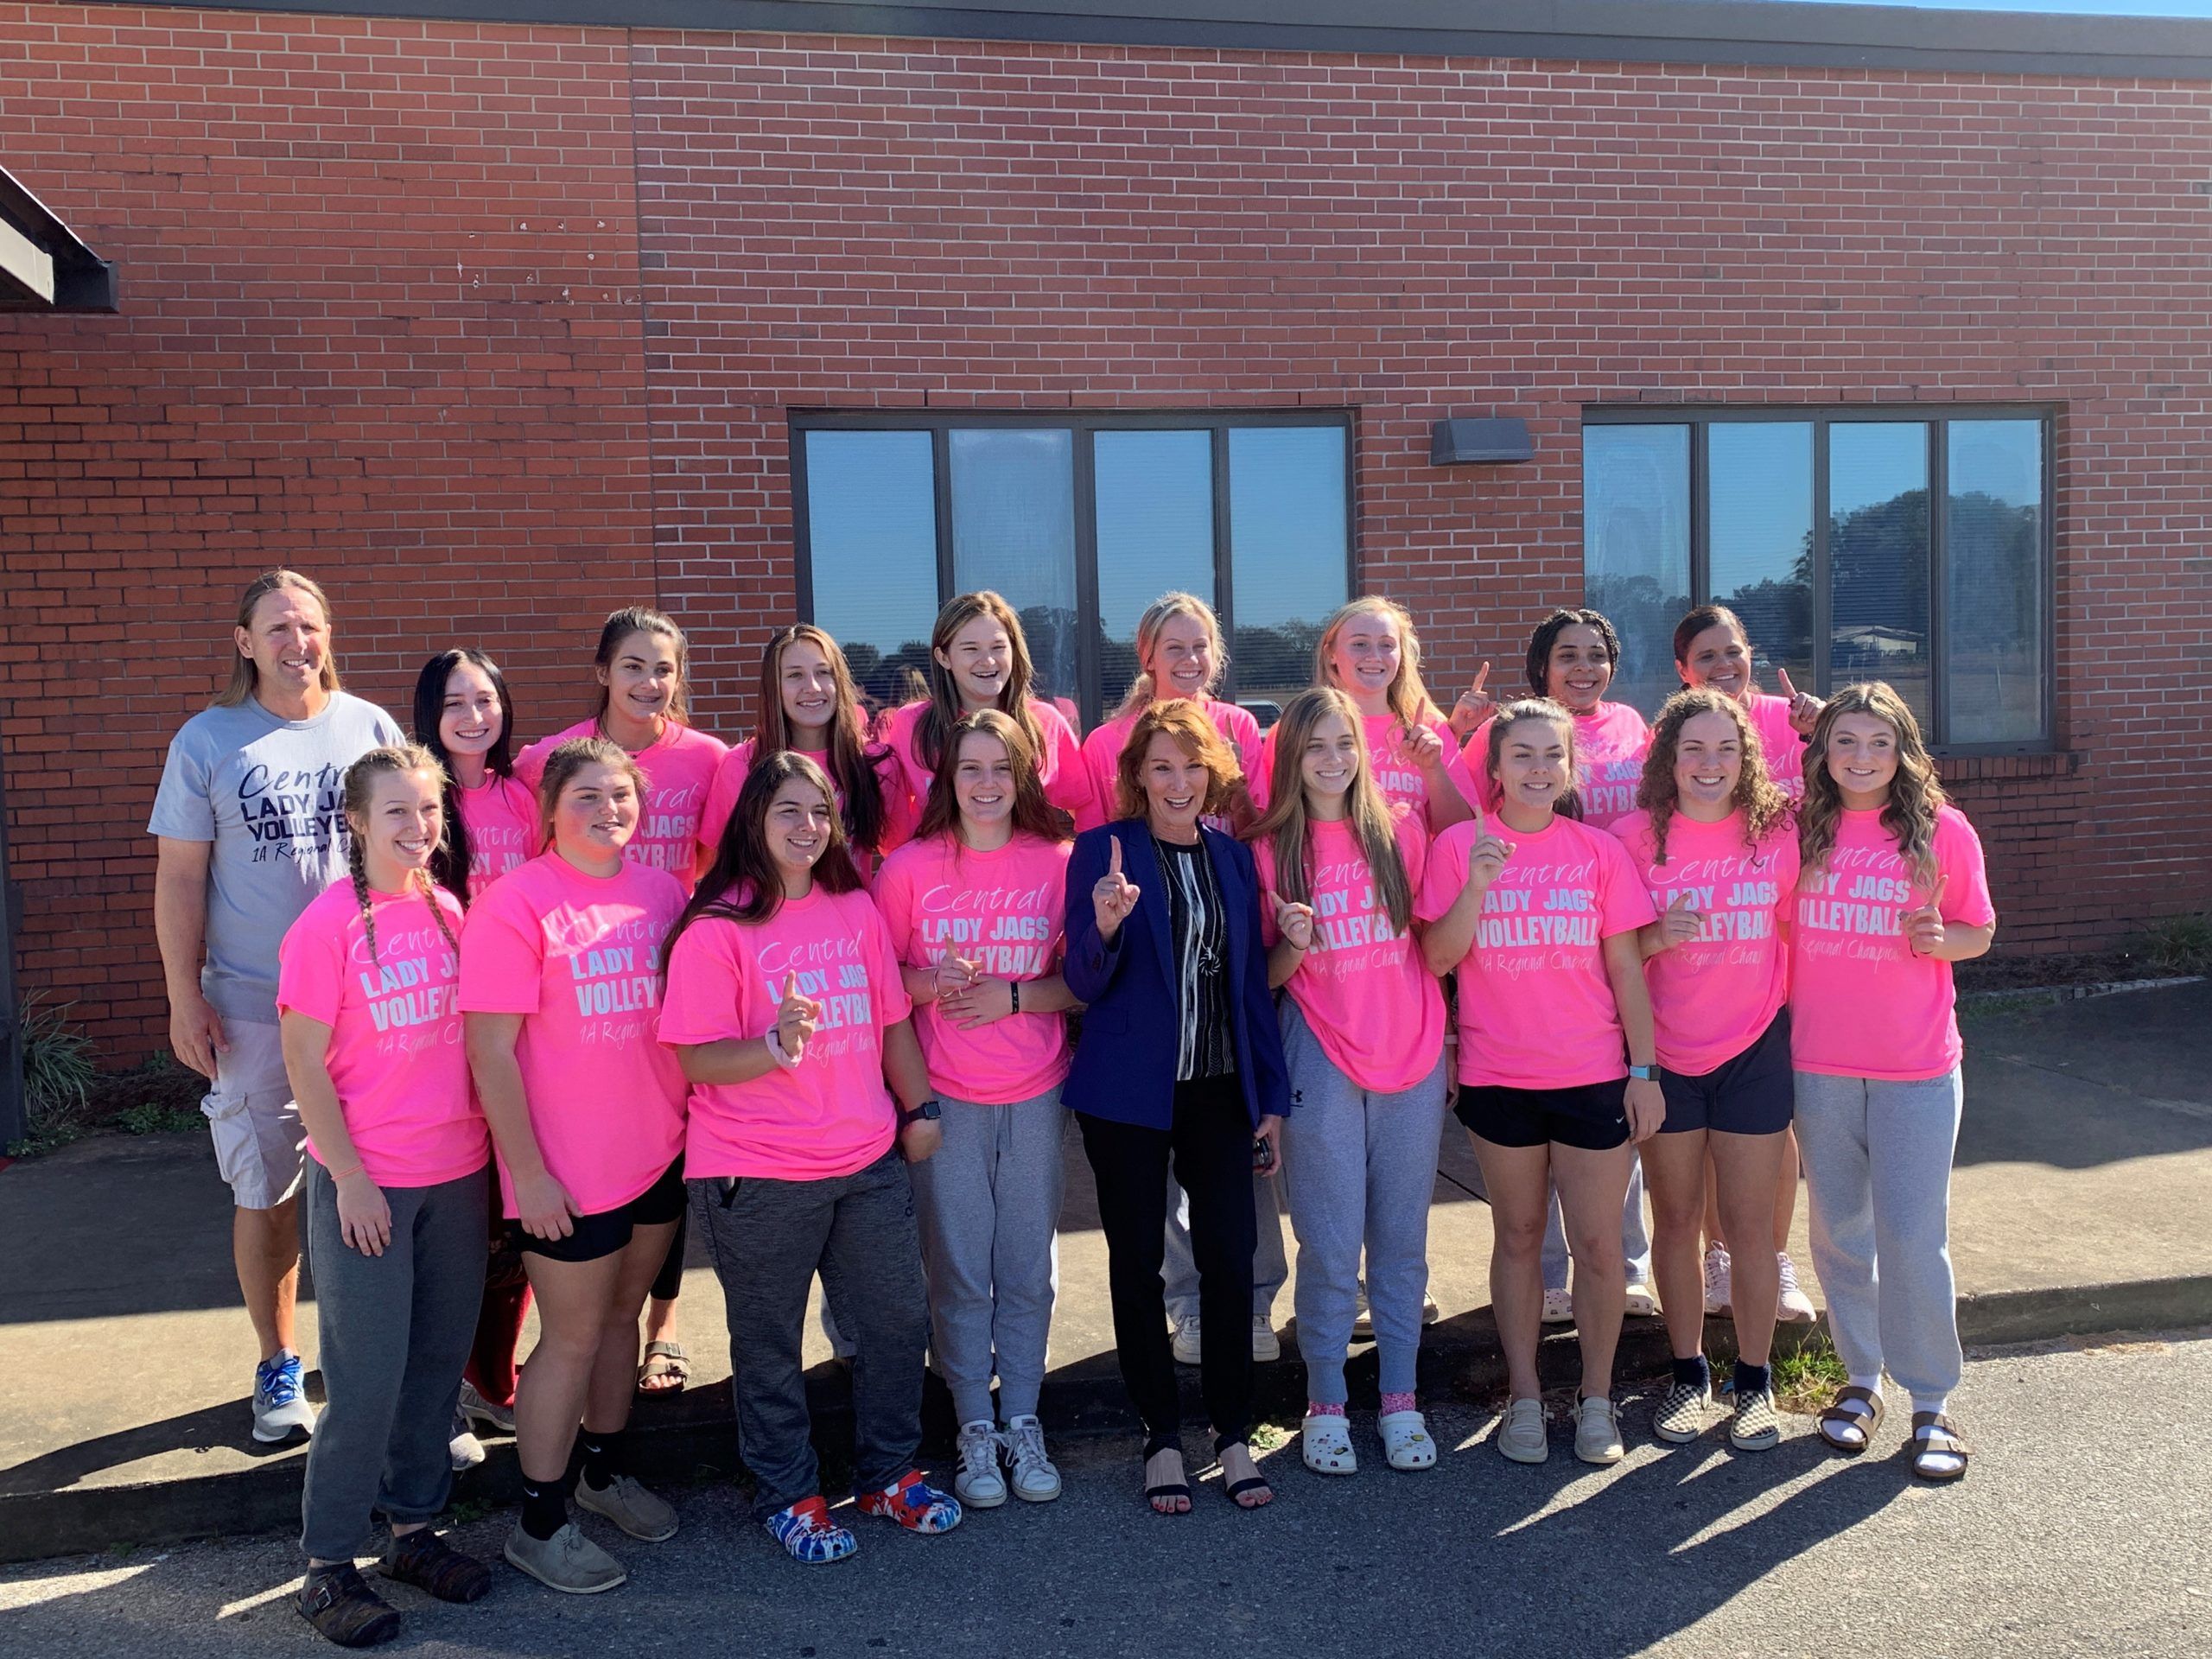 Central High School's volleyball team poses with Superintendent Karen Barber before heading off to compete in Saturday's Final Four. They are ranked third in 1A.